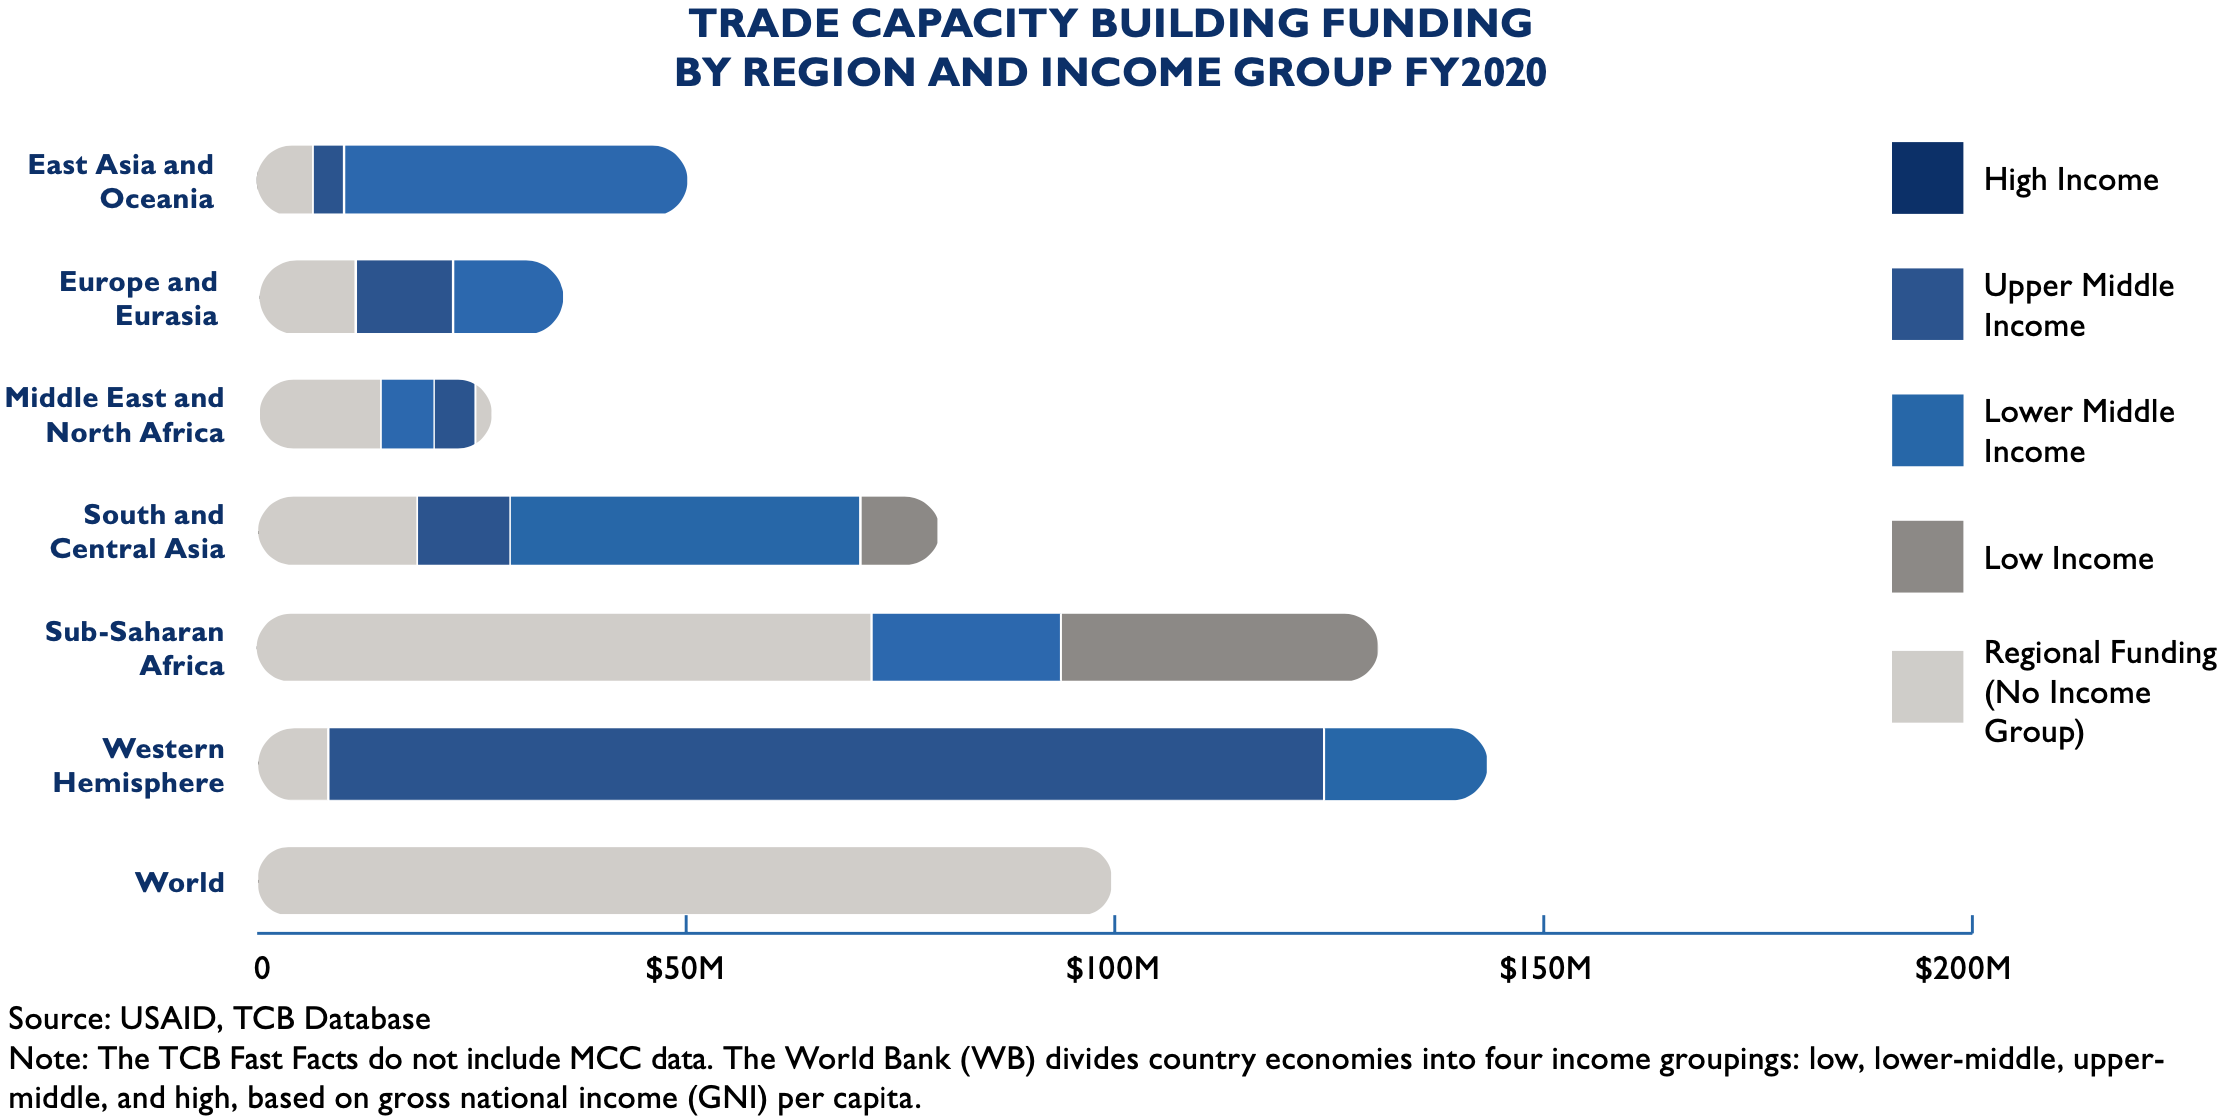 Bar chart of trade capacity building funding by region and income group FY2020